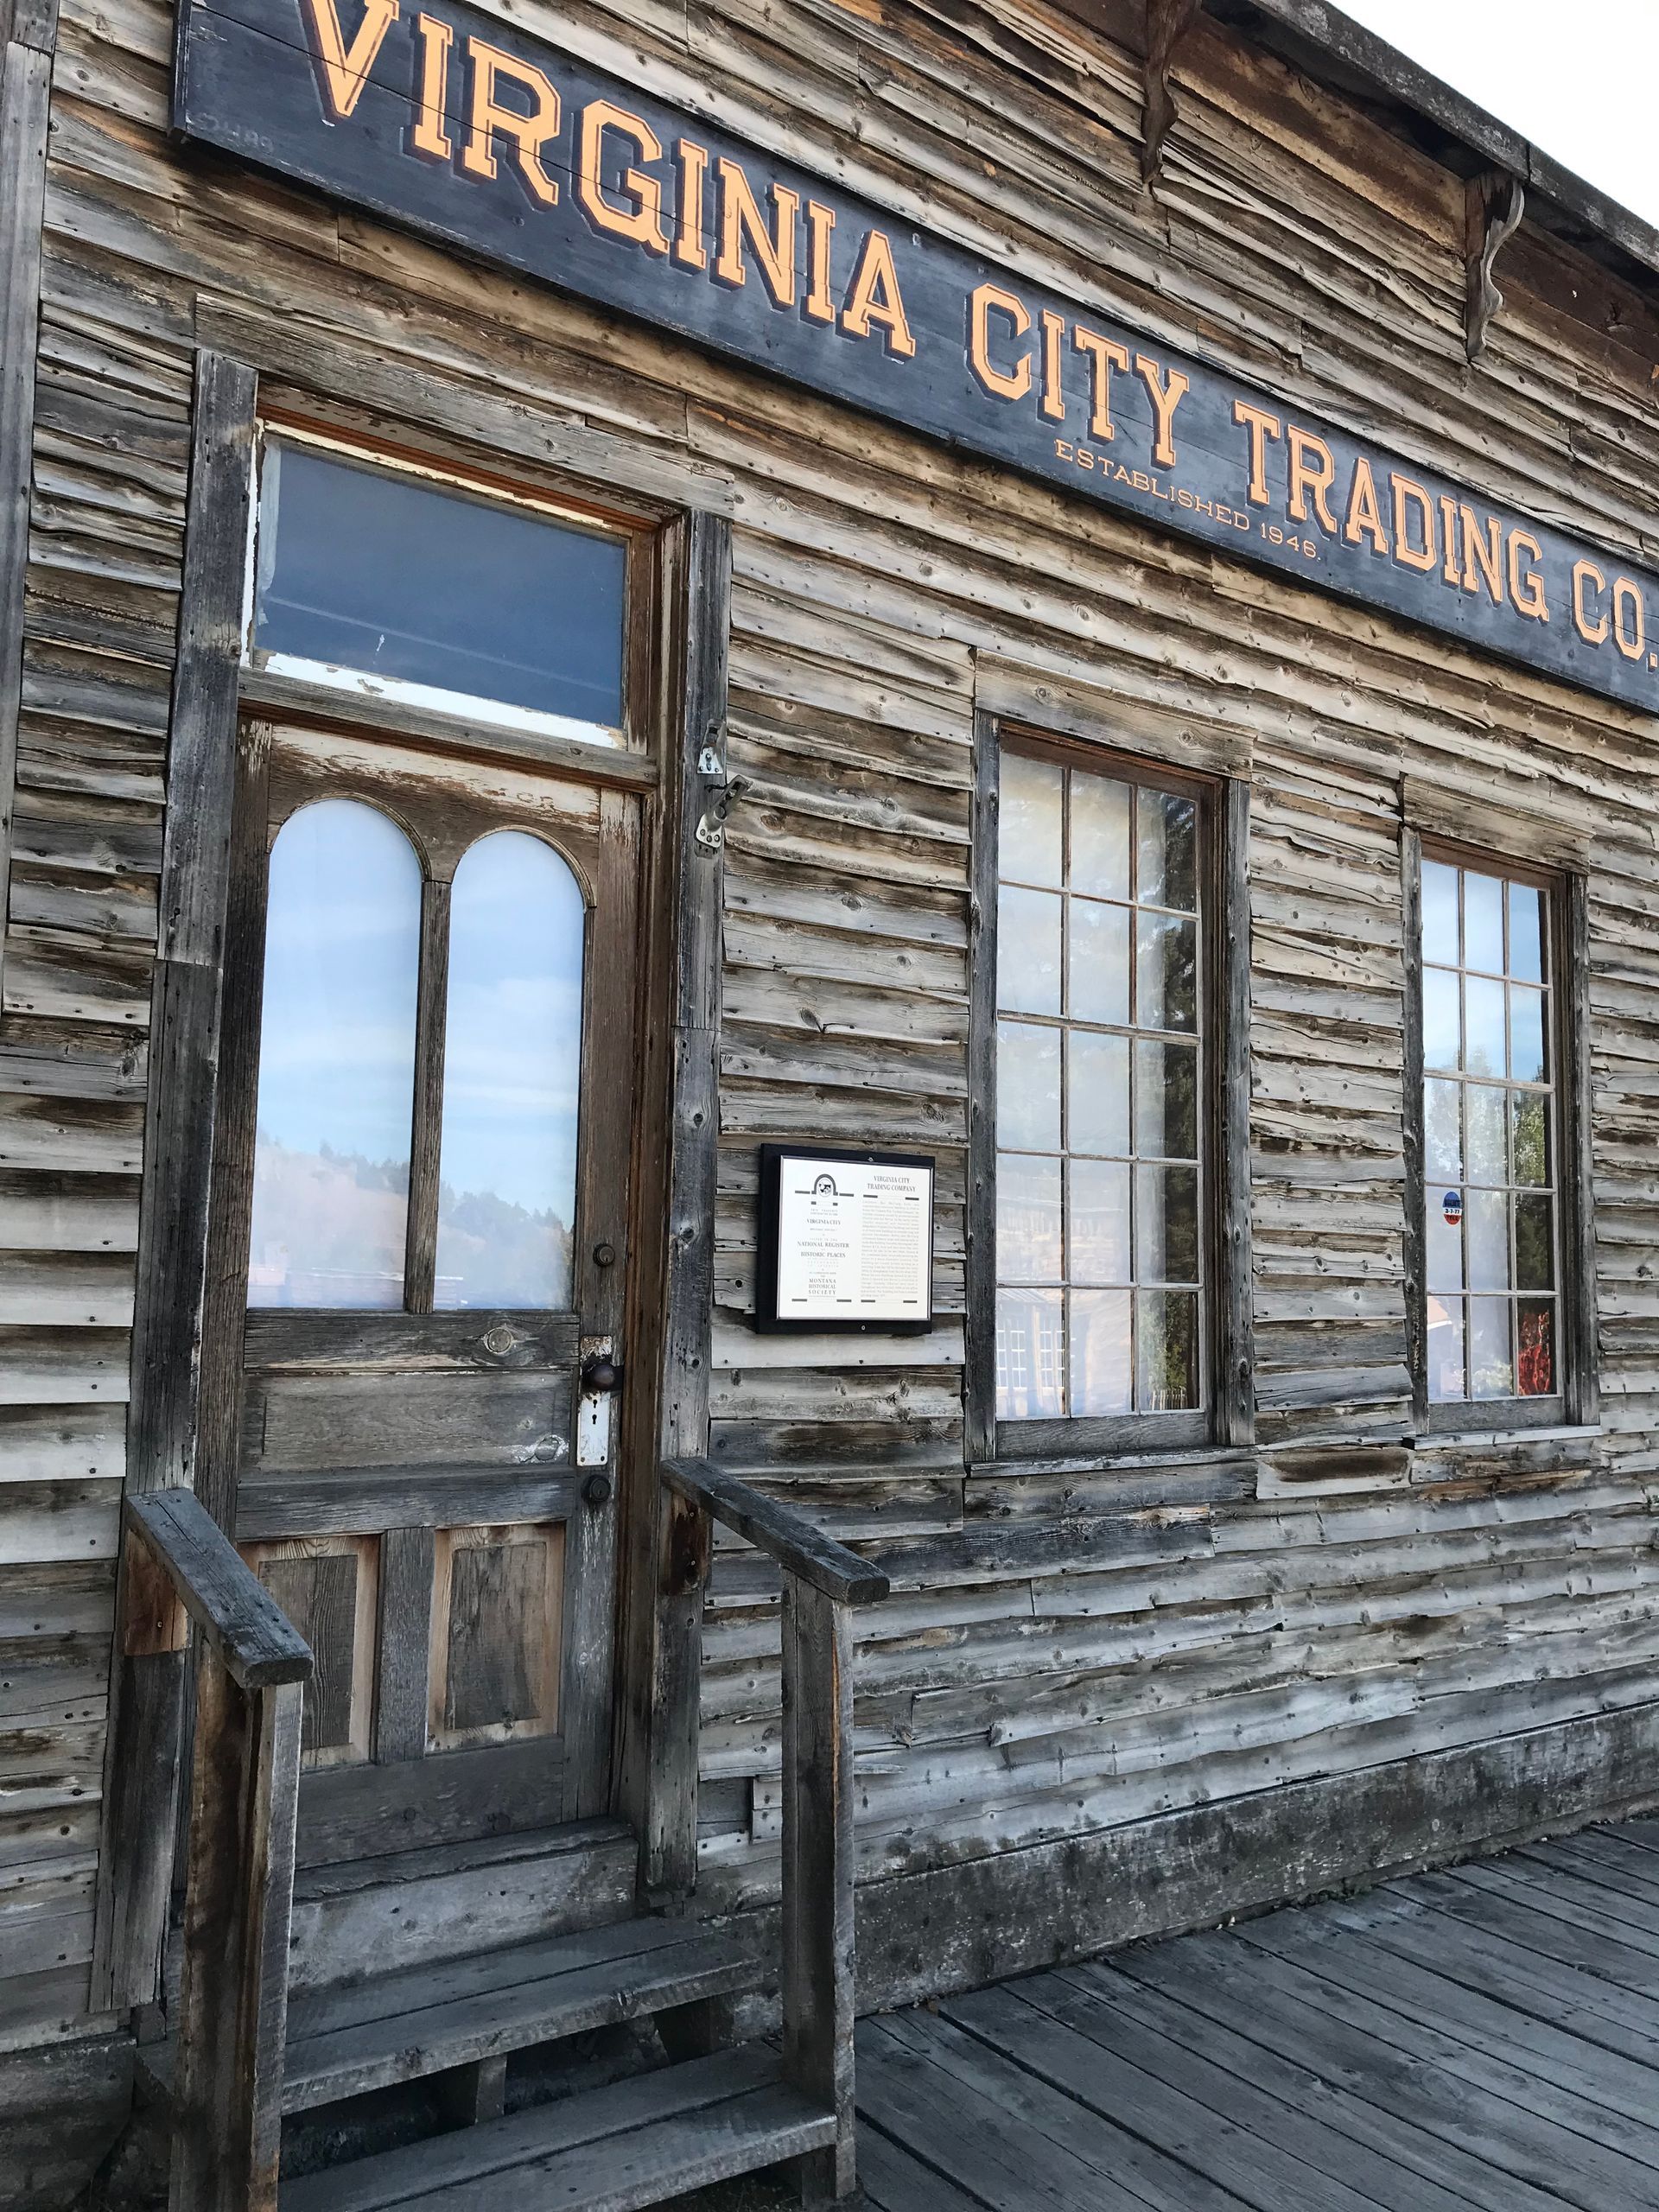 A wooden building with a sign that says `` virginia city trading co. ''